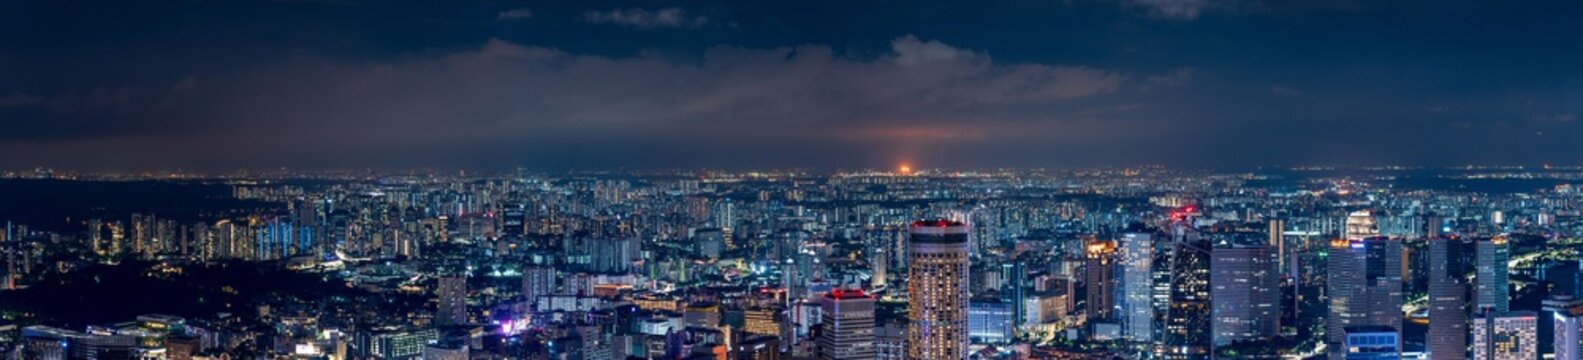 Ultra Wide panorama image of Singapore central area at night.